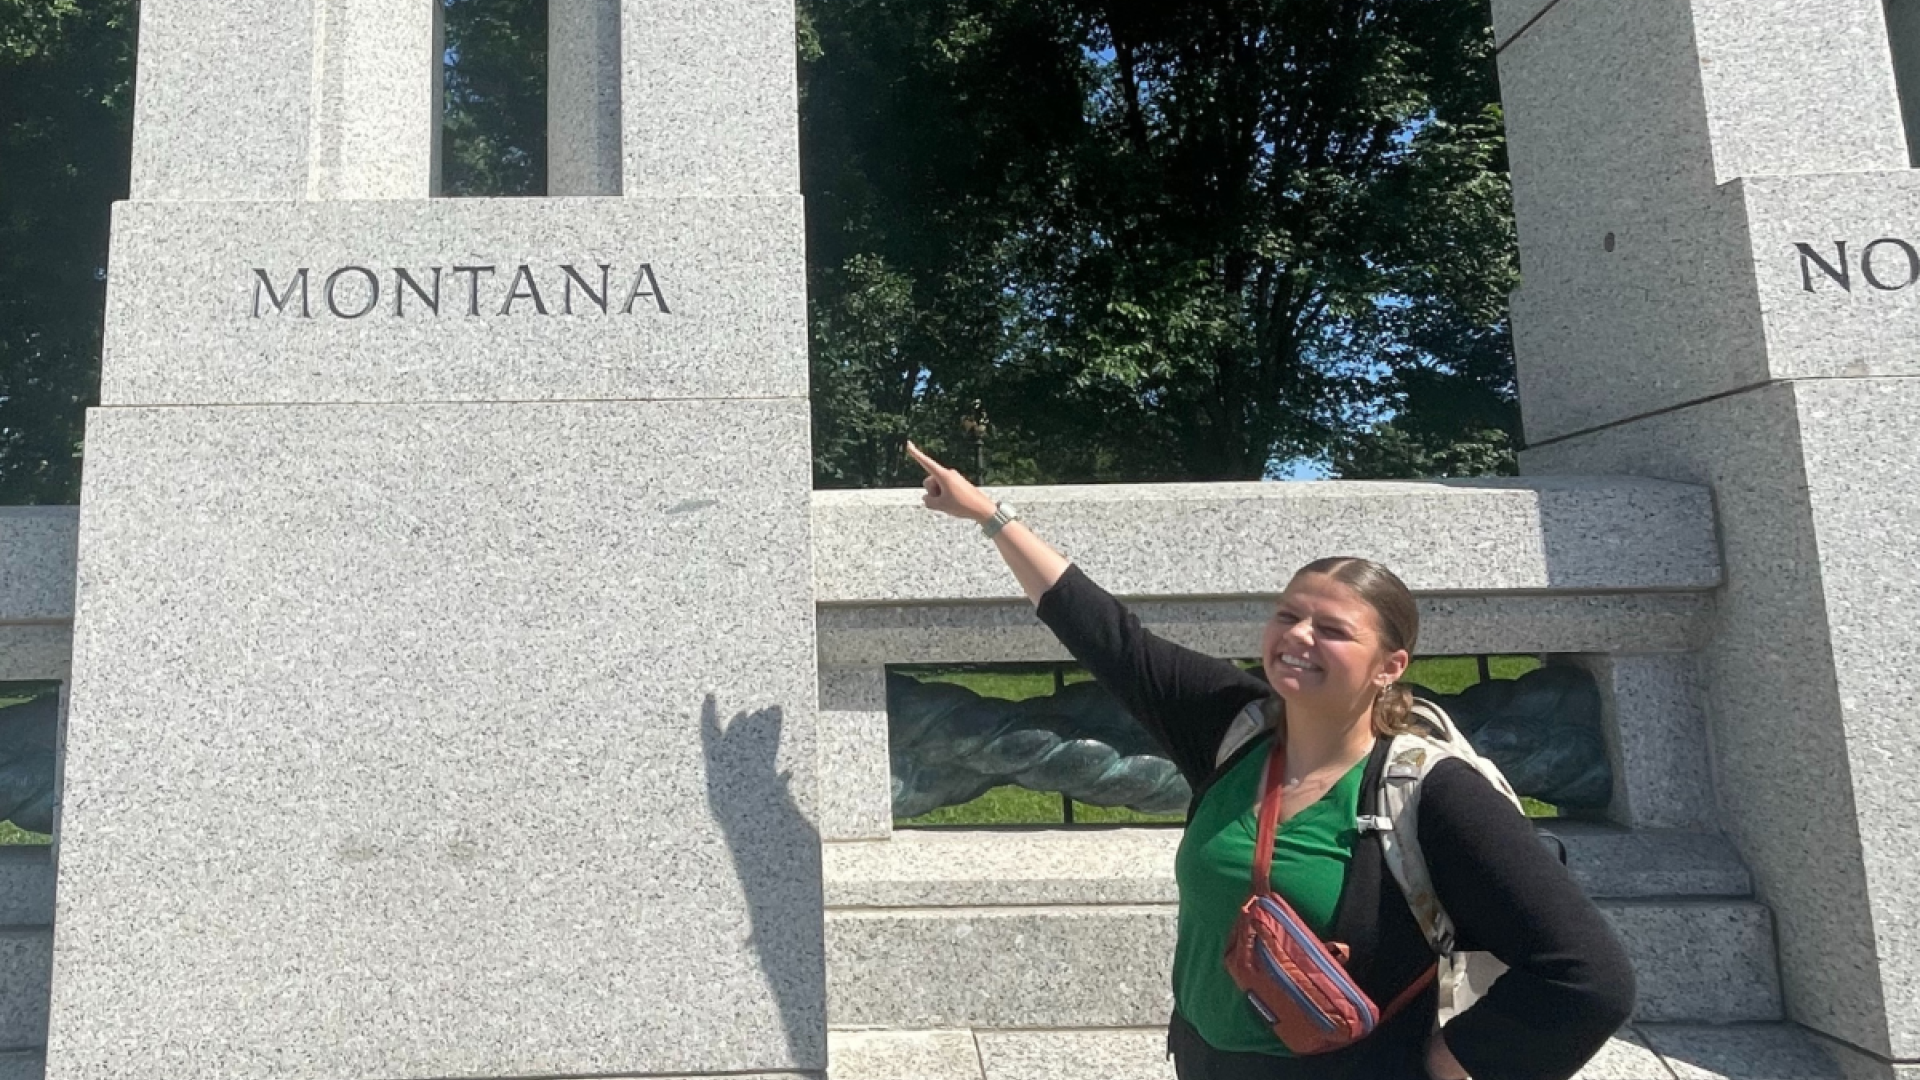 Zoe Belinda, Office of Wildland Fire intern, standing next to the Montana block of the World War II Memorial in Washington D.C. She points to the word "Montana."